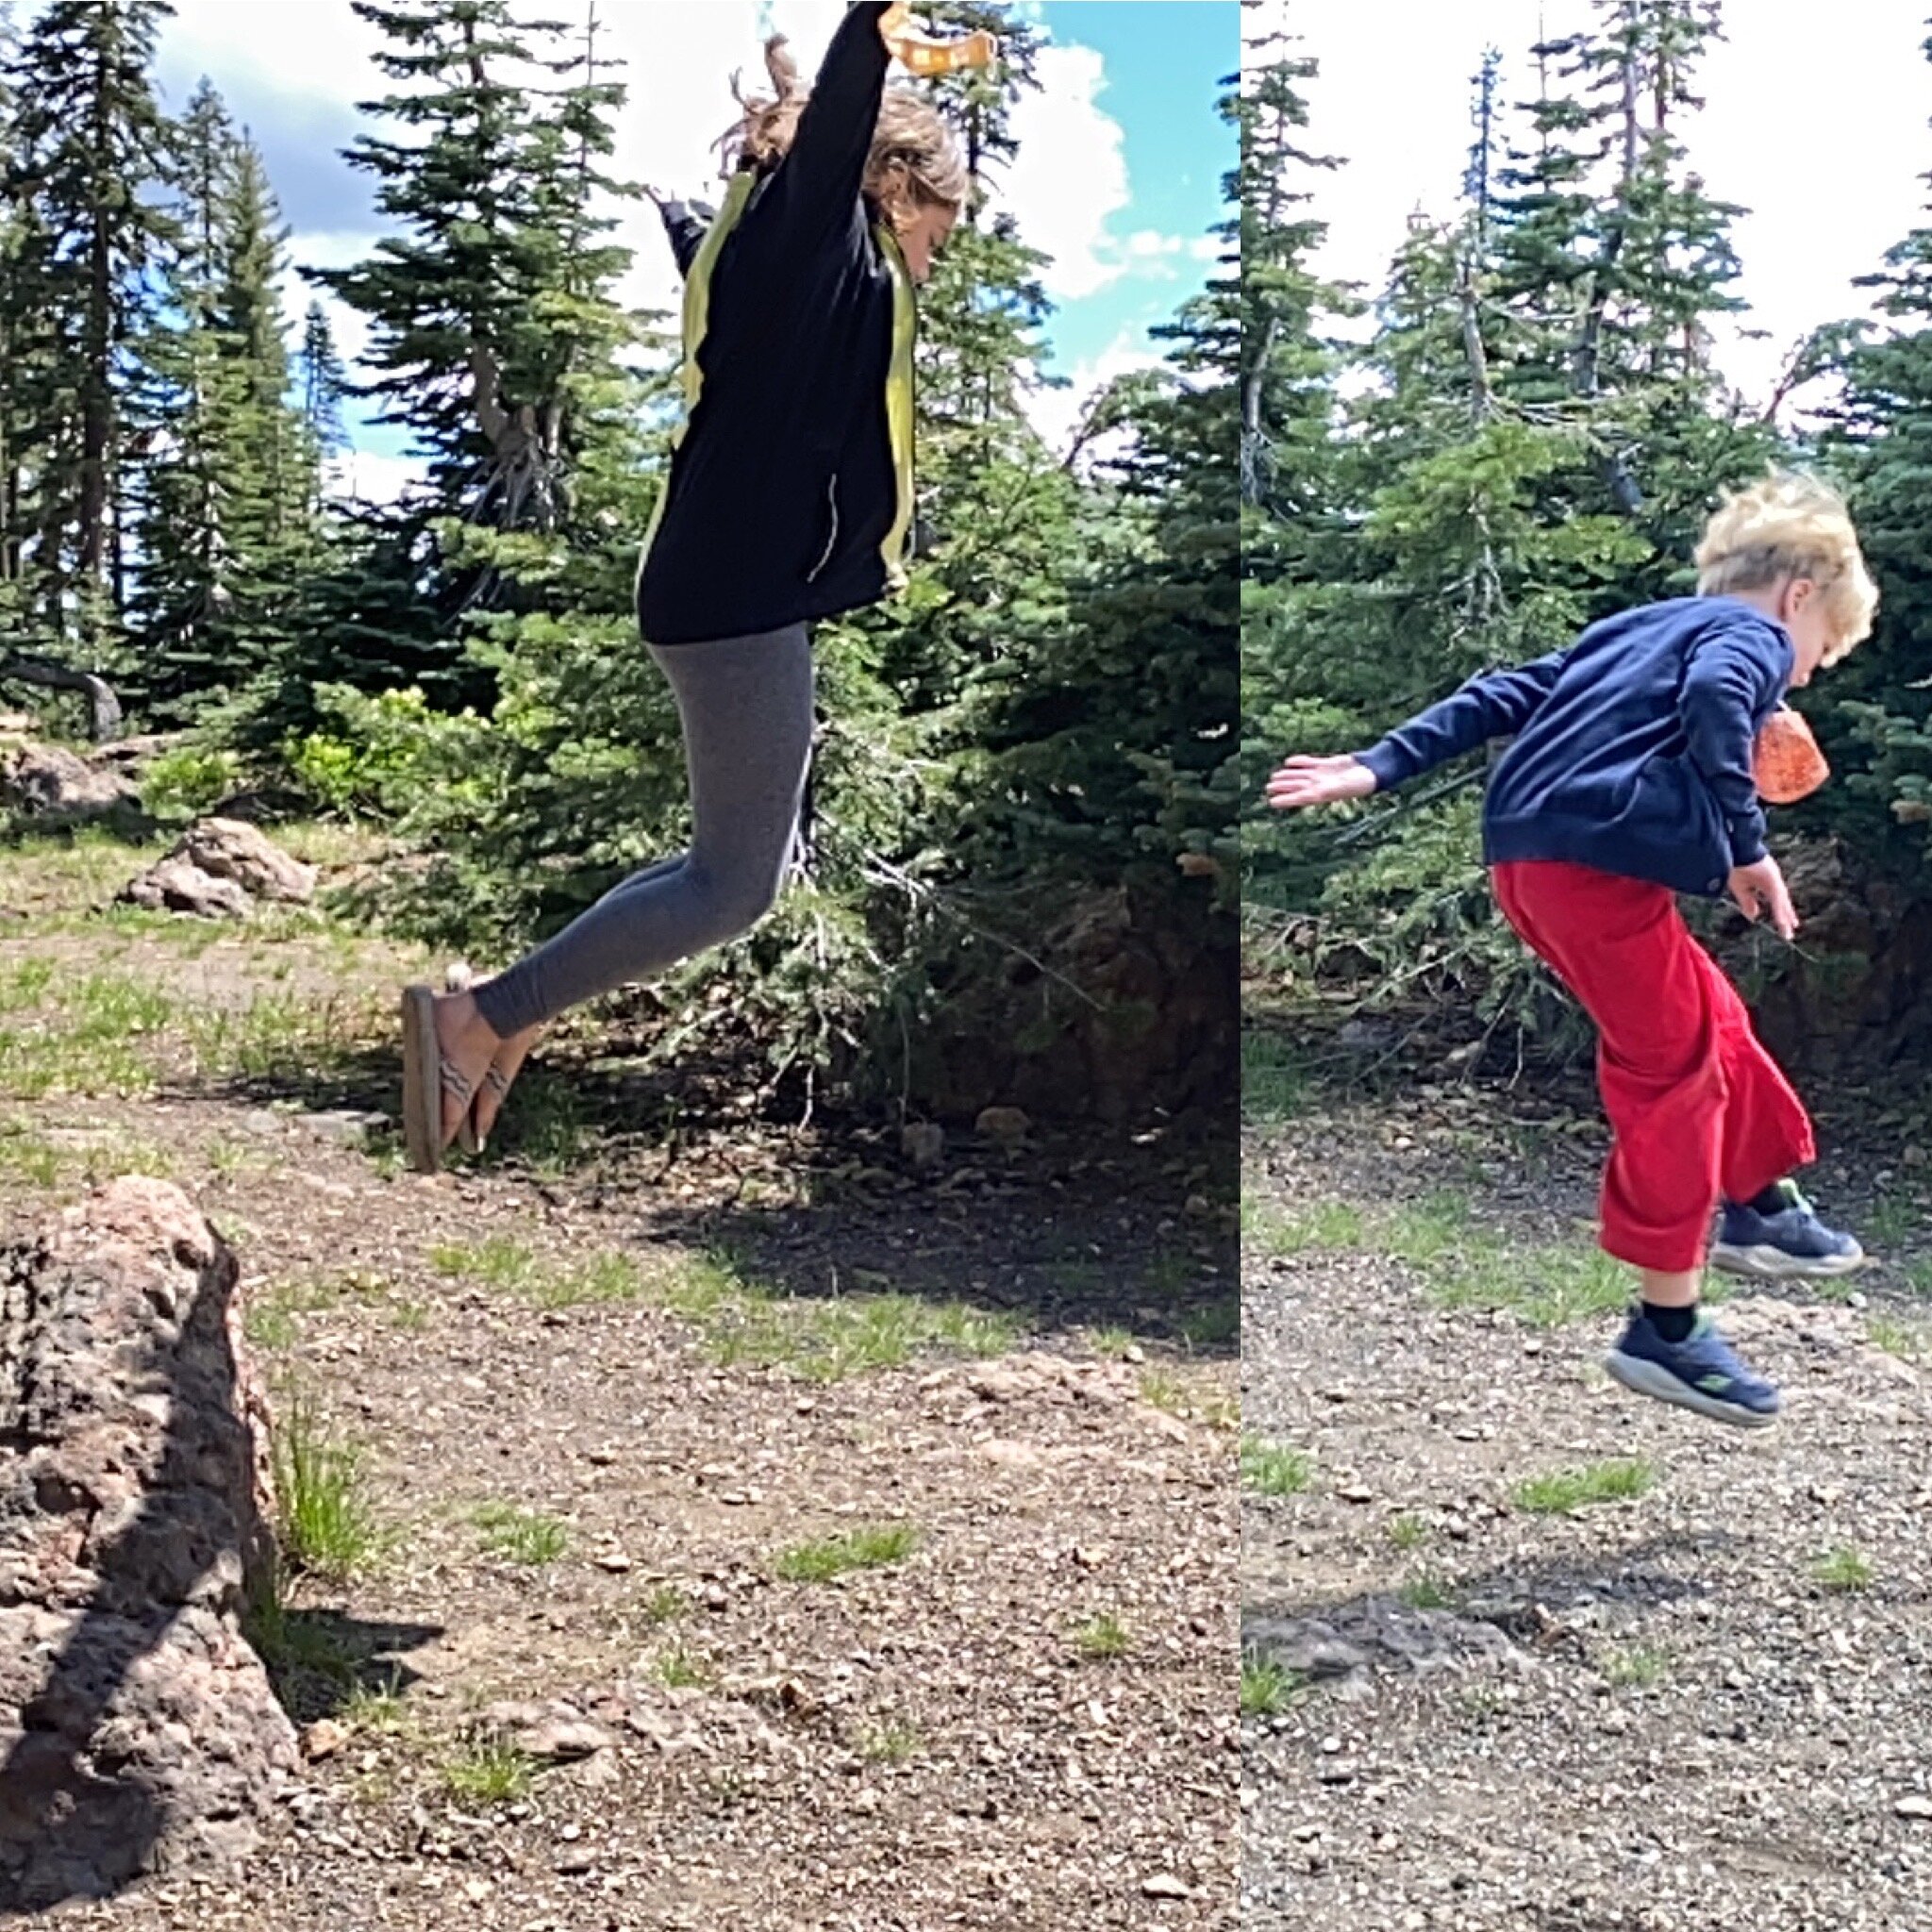 Kids letting out energy and enjoying exploring and jumping around Lassen Volcanic National Park.  Photos by Karen Boudreaux, June 8, 2021